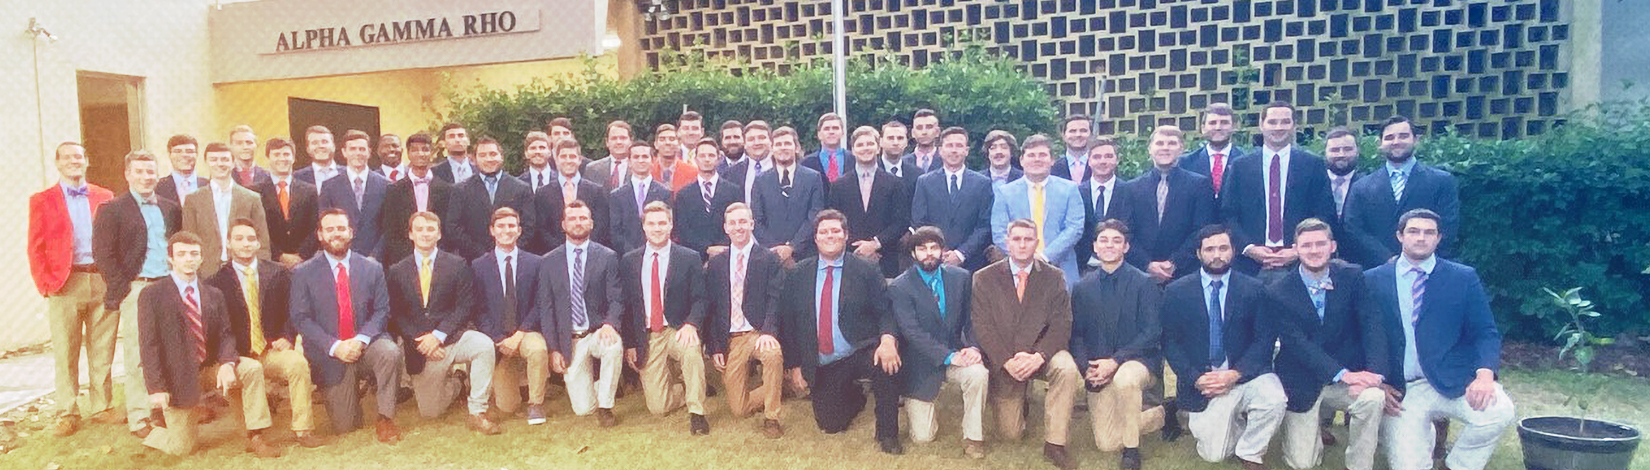 30 young men in professional clothing pose for a photo outside the Alpha Gamma Rho house. 